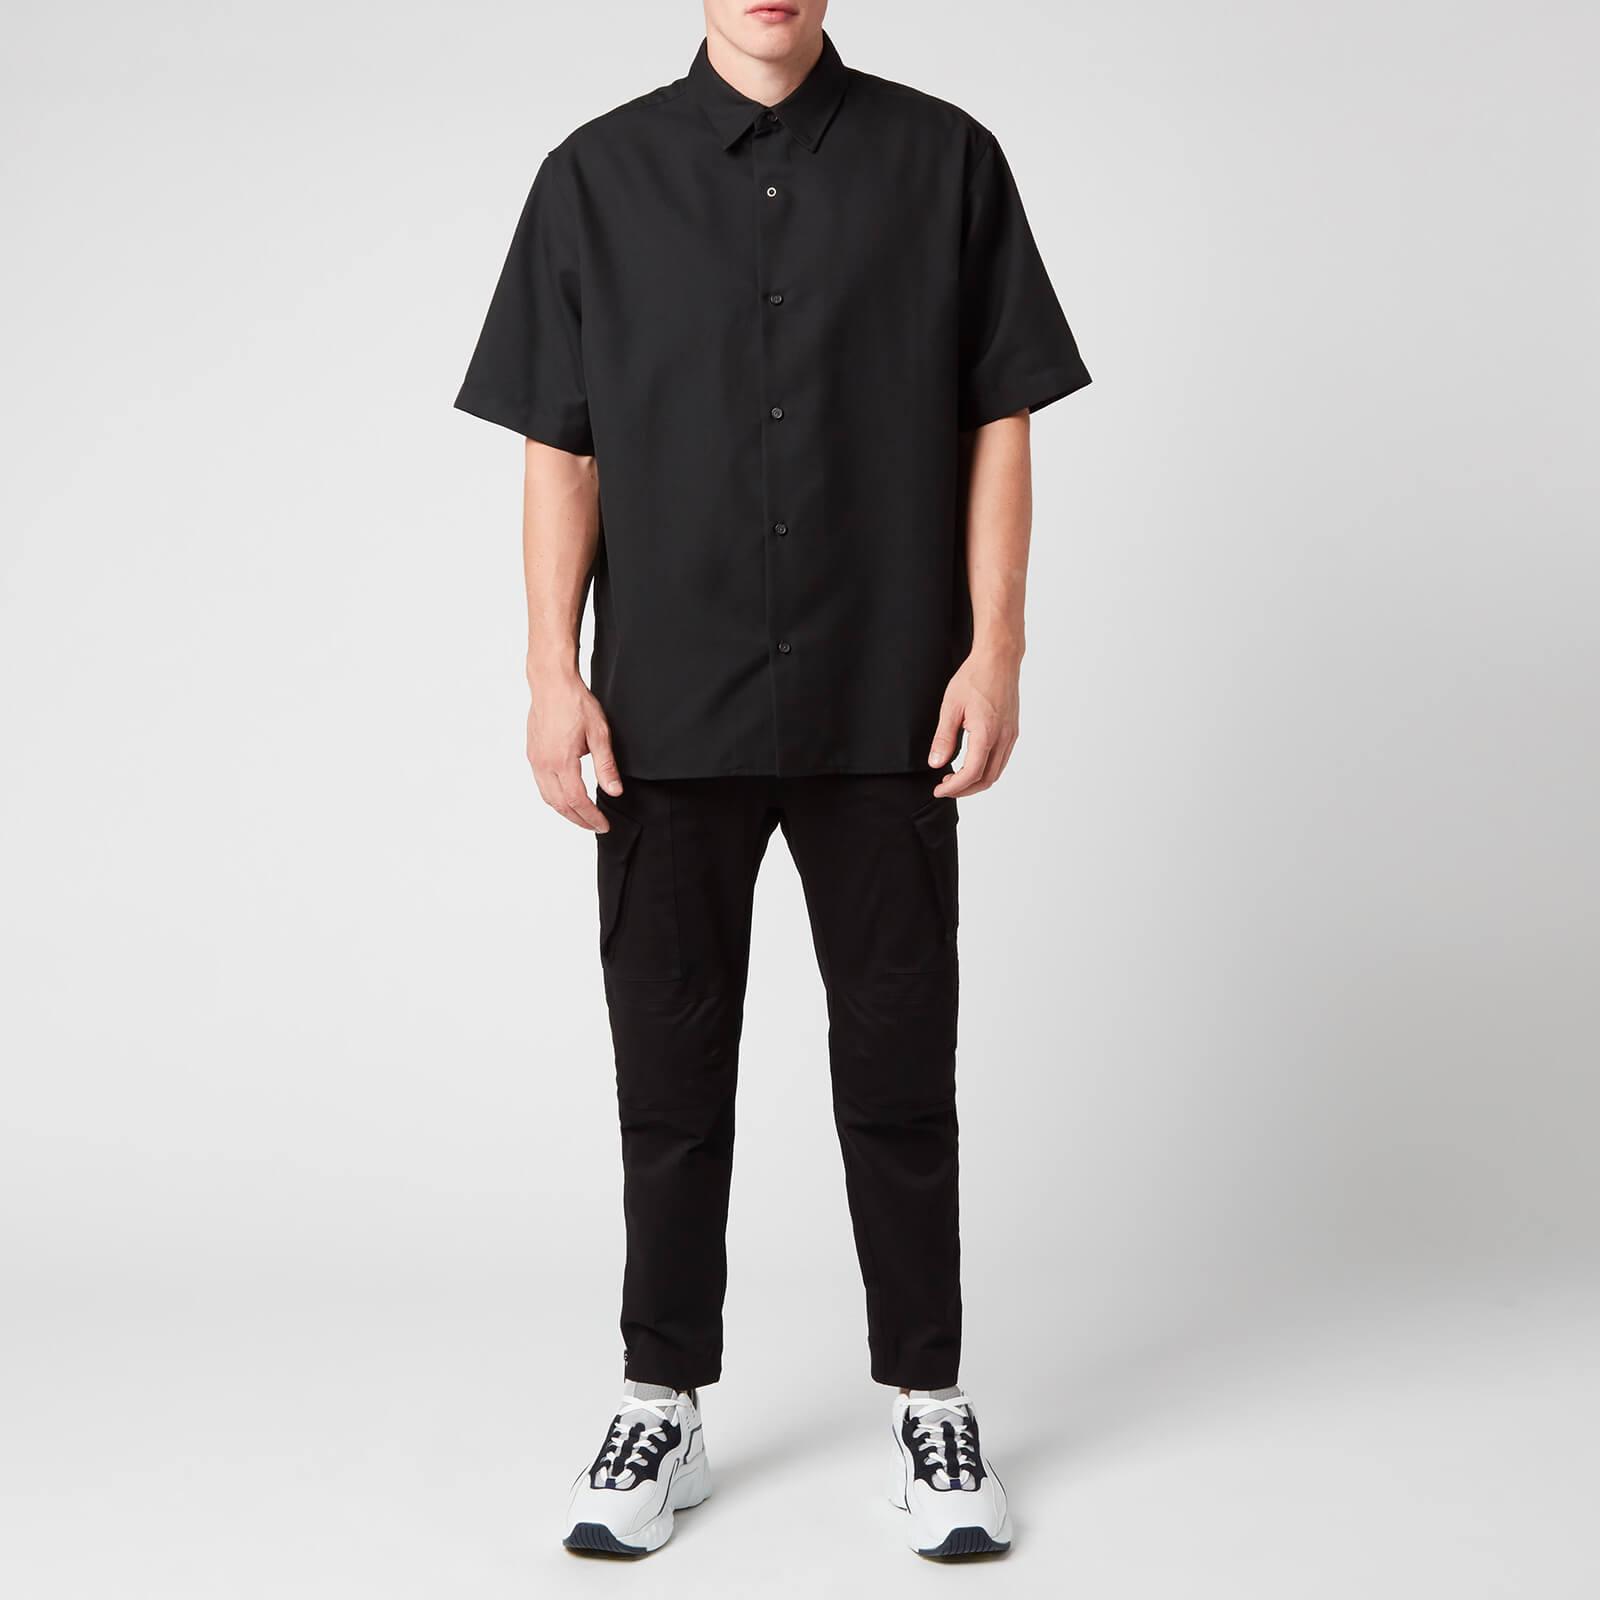 Acne Studios Synthetic Boxy Short Sleeve Shirt in Black for Men - Lyst